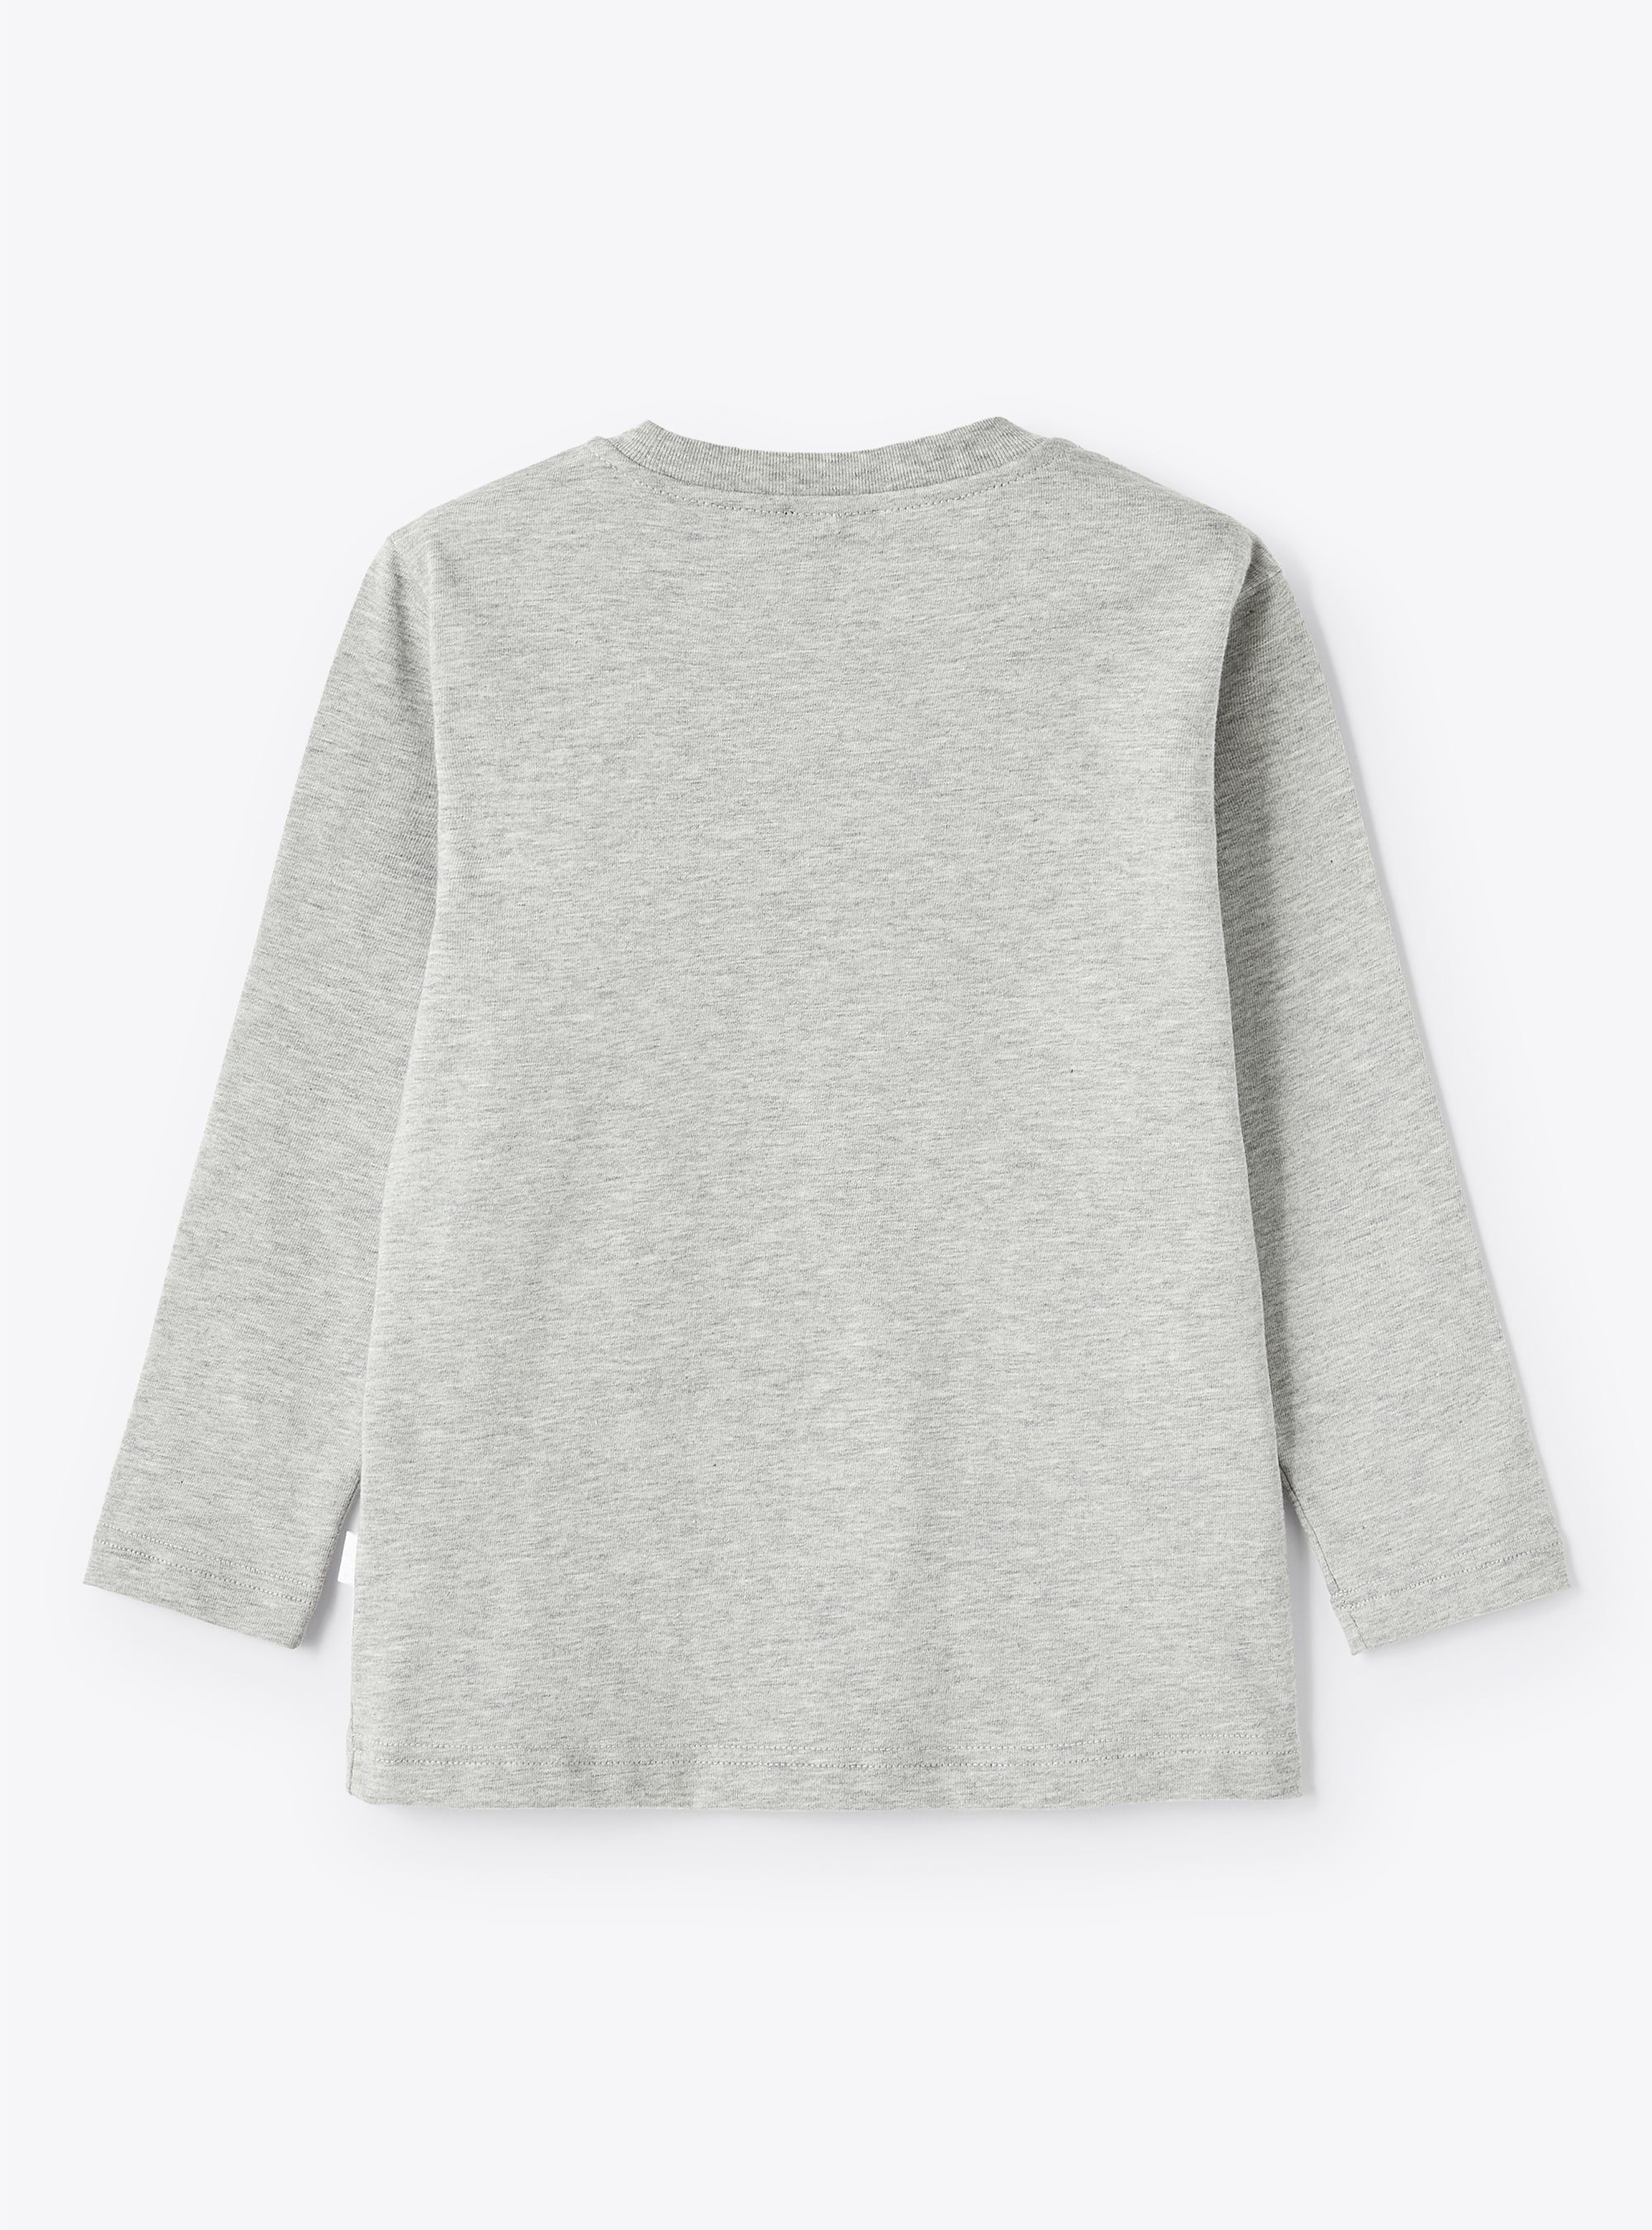 Penguin print and embroidery T-shirt - Grey | Il Gufo